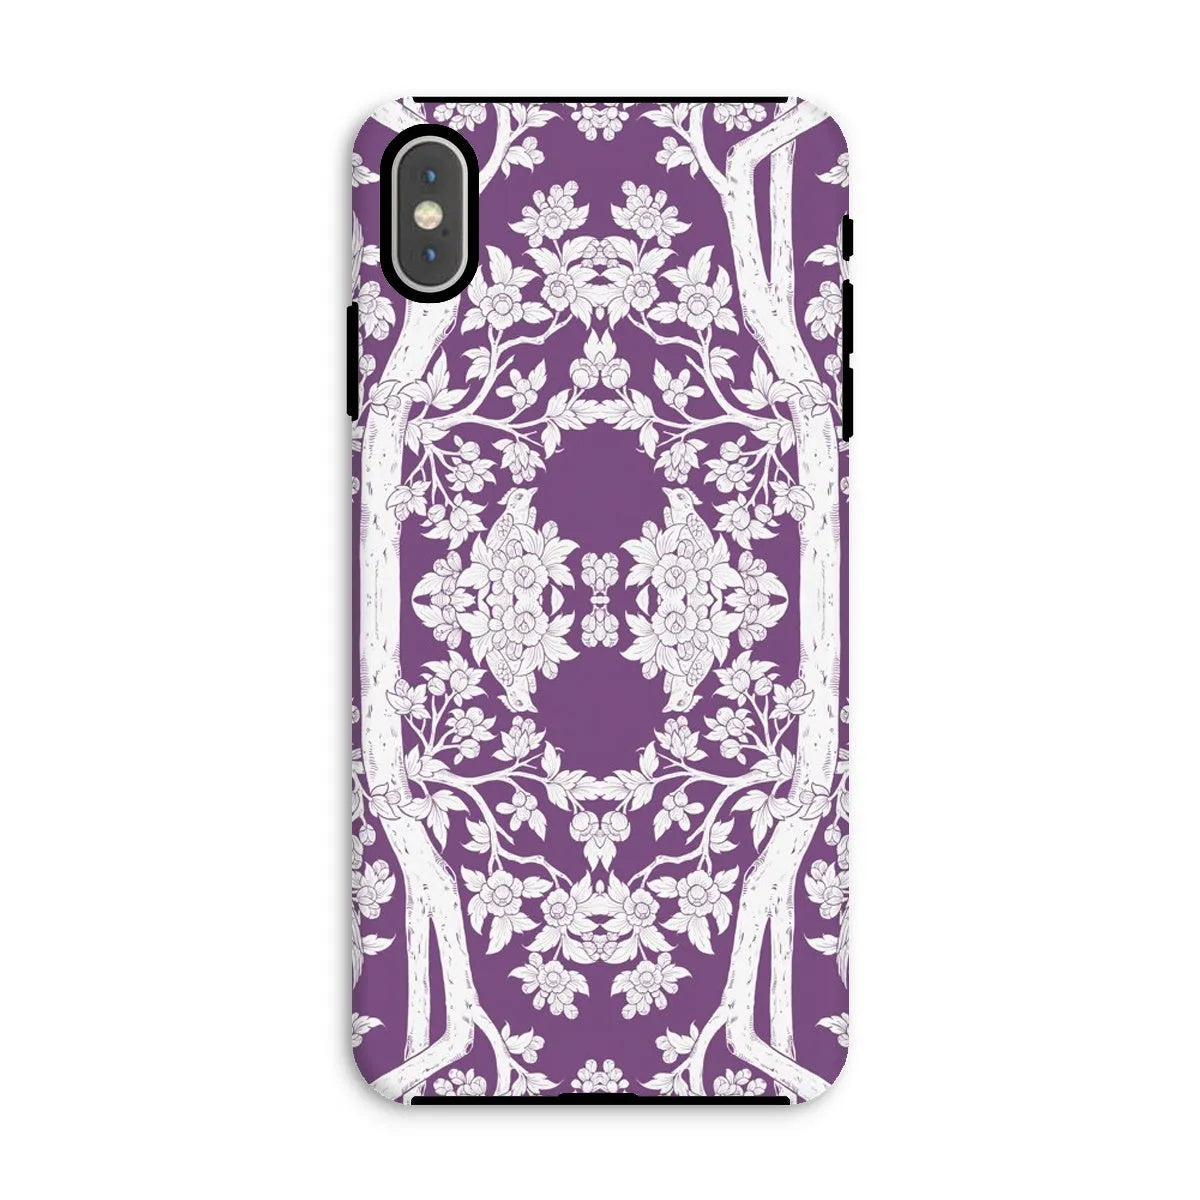 Aviary Purple Aesthetic Pattern Art Phone Case - Iphone Xs Max / Matte - Mobile Phone Cases - Aesthetic Art